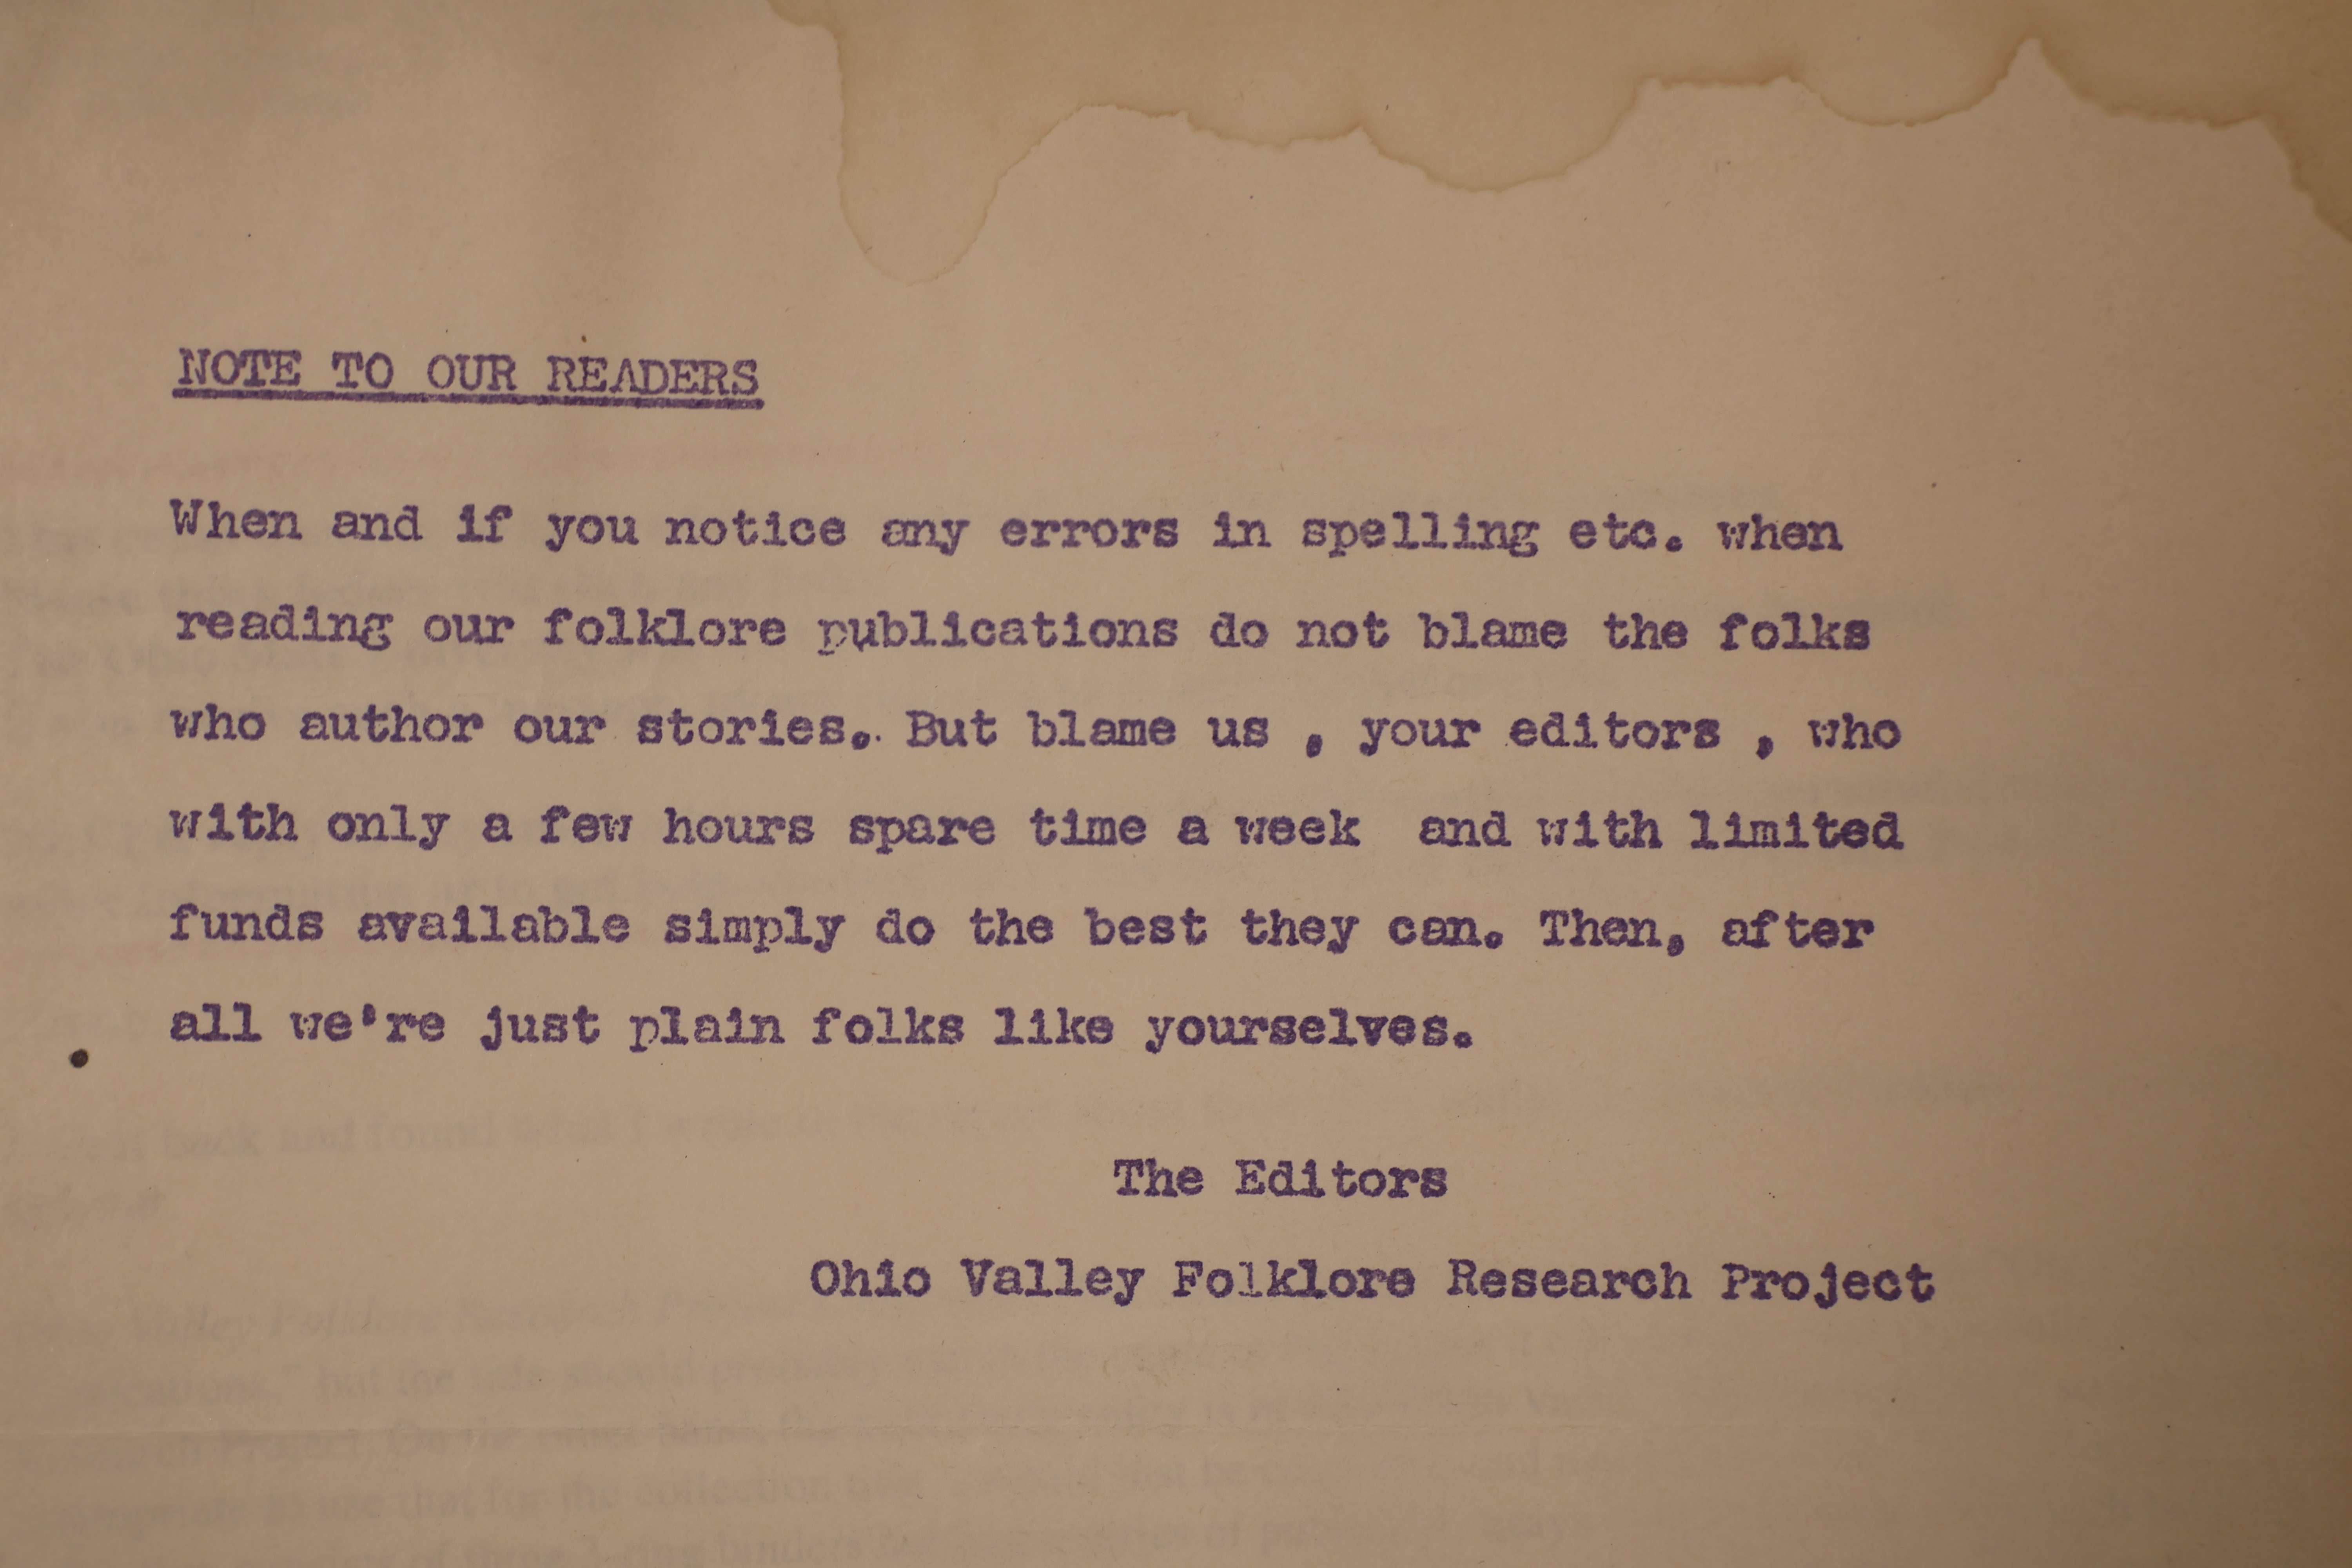 NOTE TO OUR READERS  When and if you notice any errors in spelling etc. when reading our folklore publications do not blame the folks who author our stories. But blame us, your editors, who with only a few hours spare time a week and with limited funds available simply do the best they can. Then, after all we’re just plain folks like yourselves.  The Editors  Ohio Valley Folklore Research Project